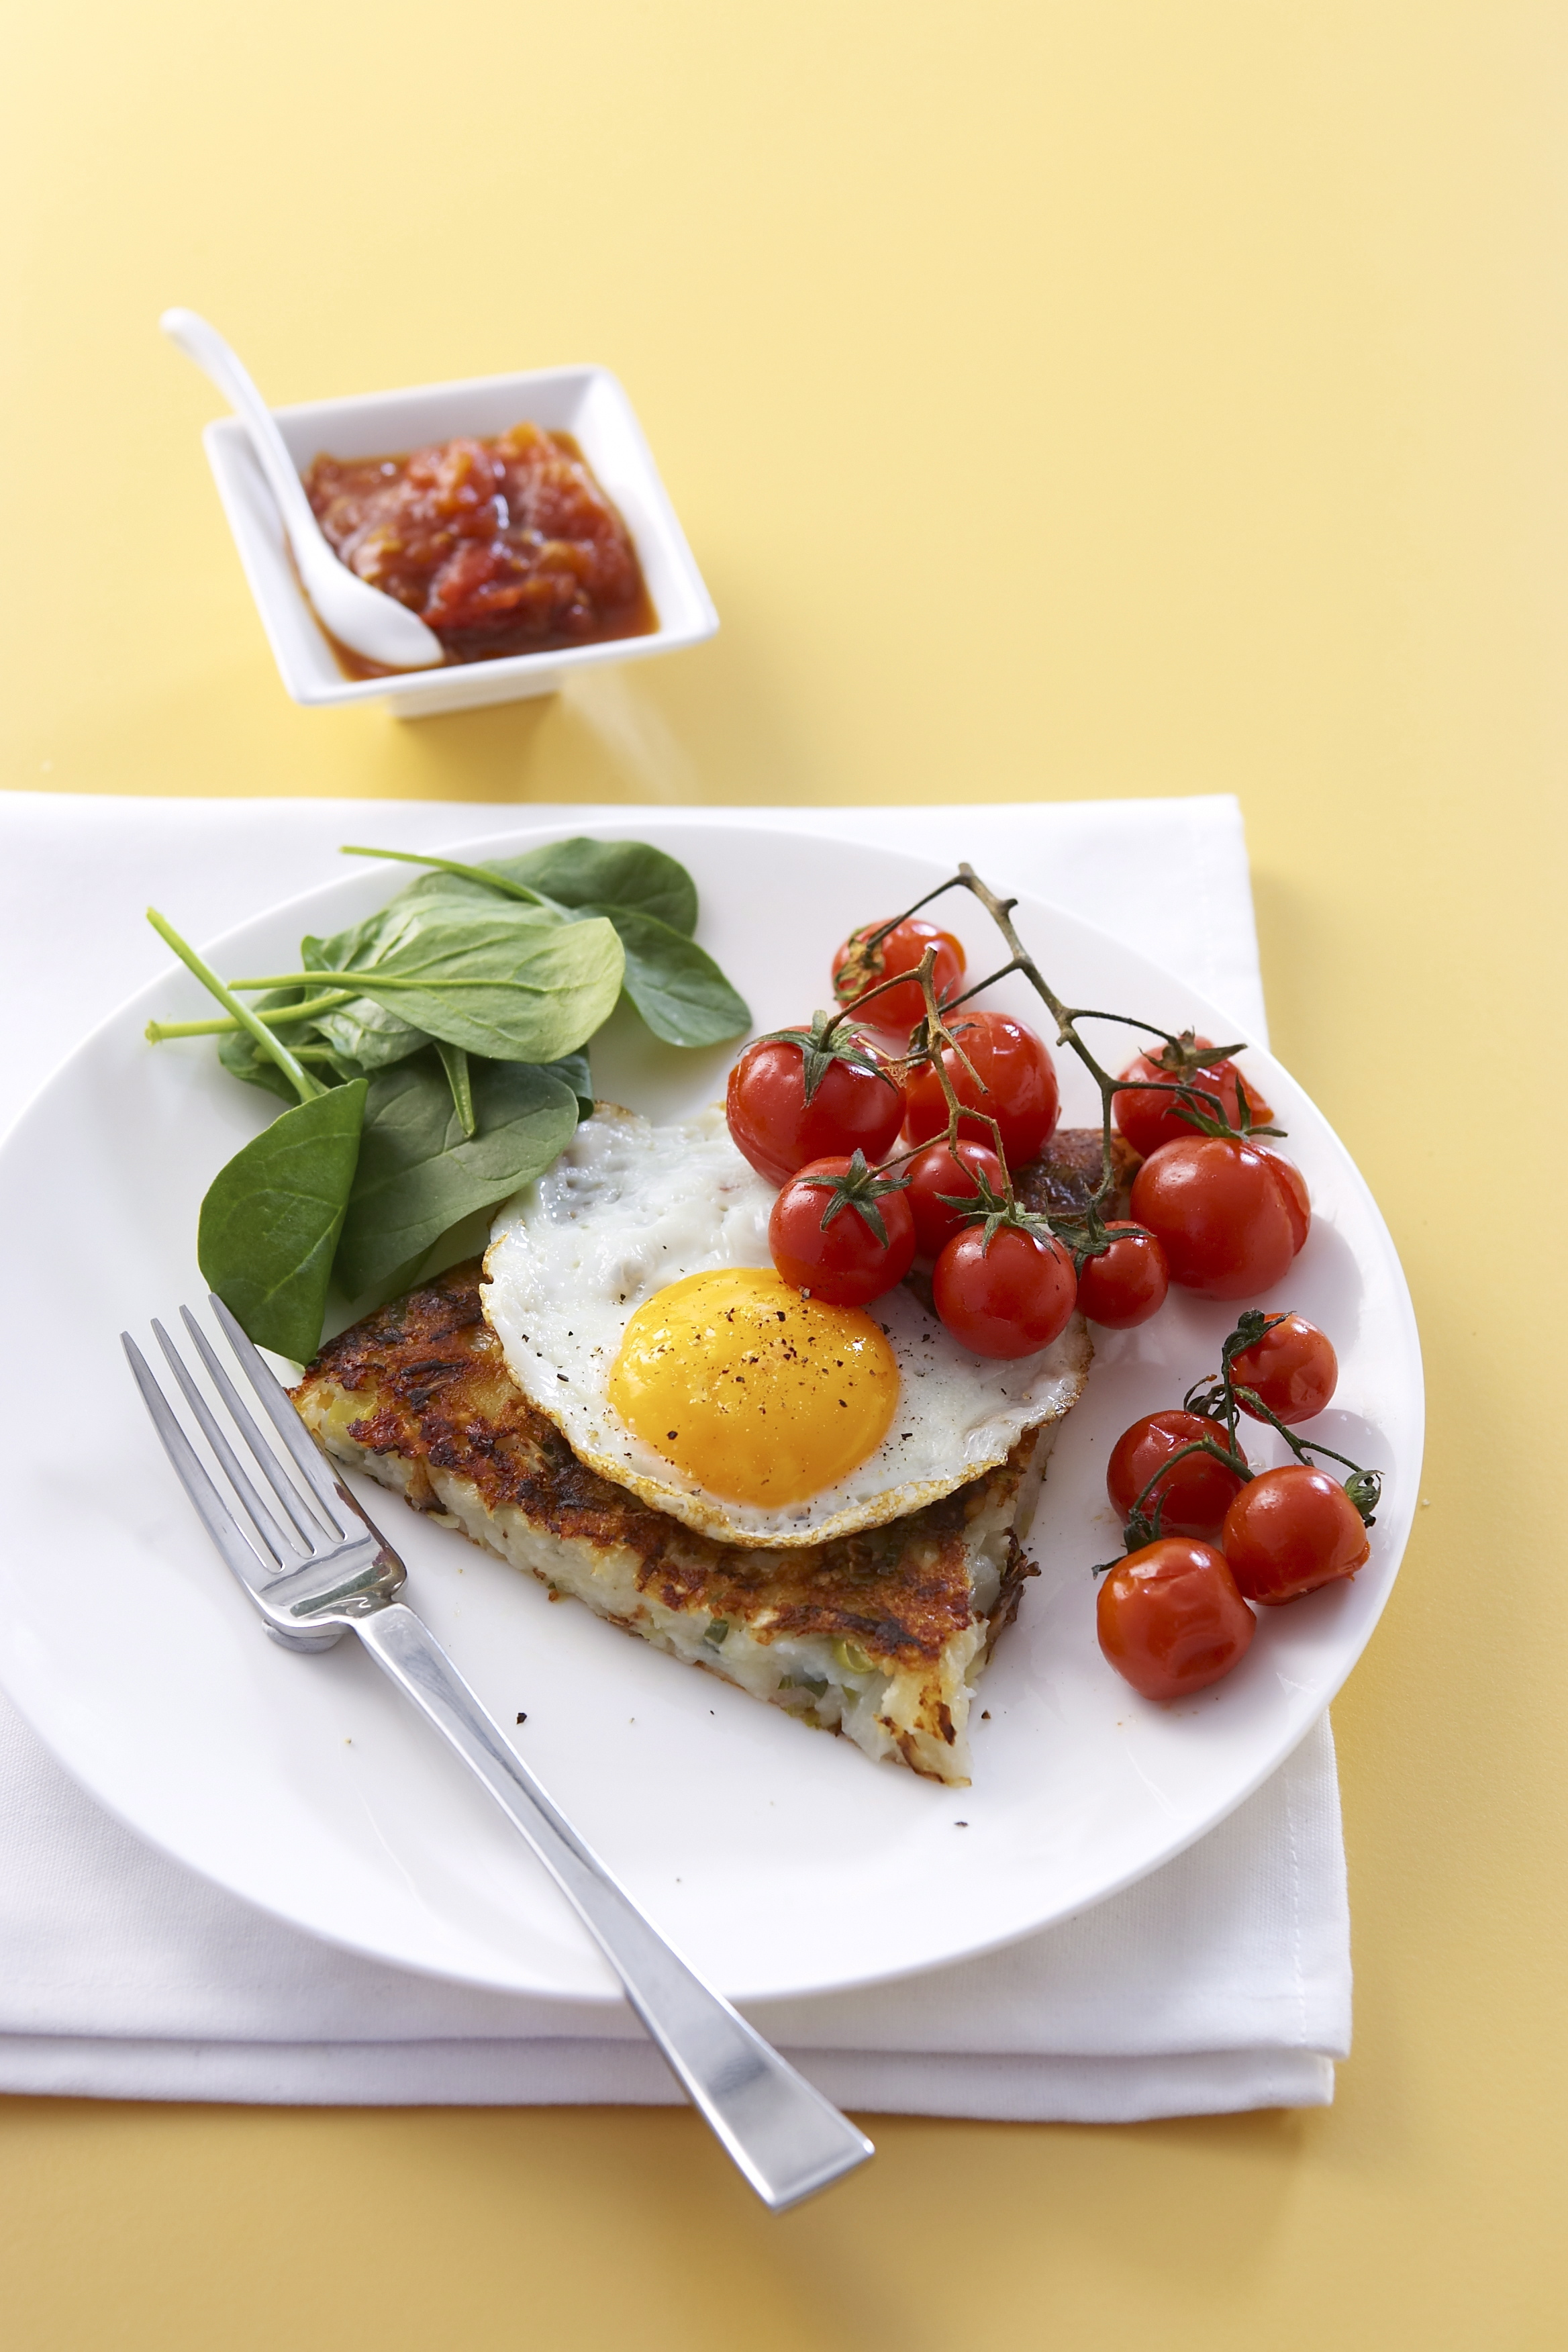 download english food bubble and squeak